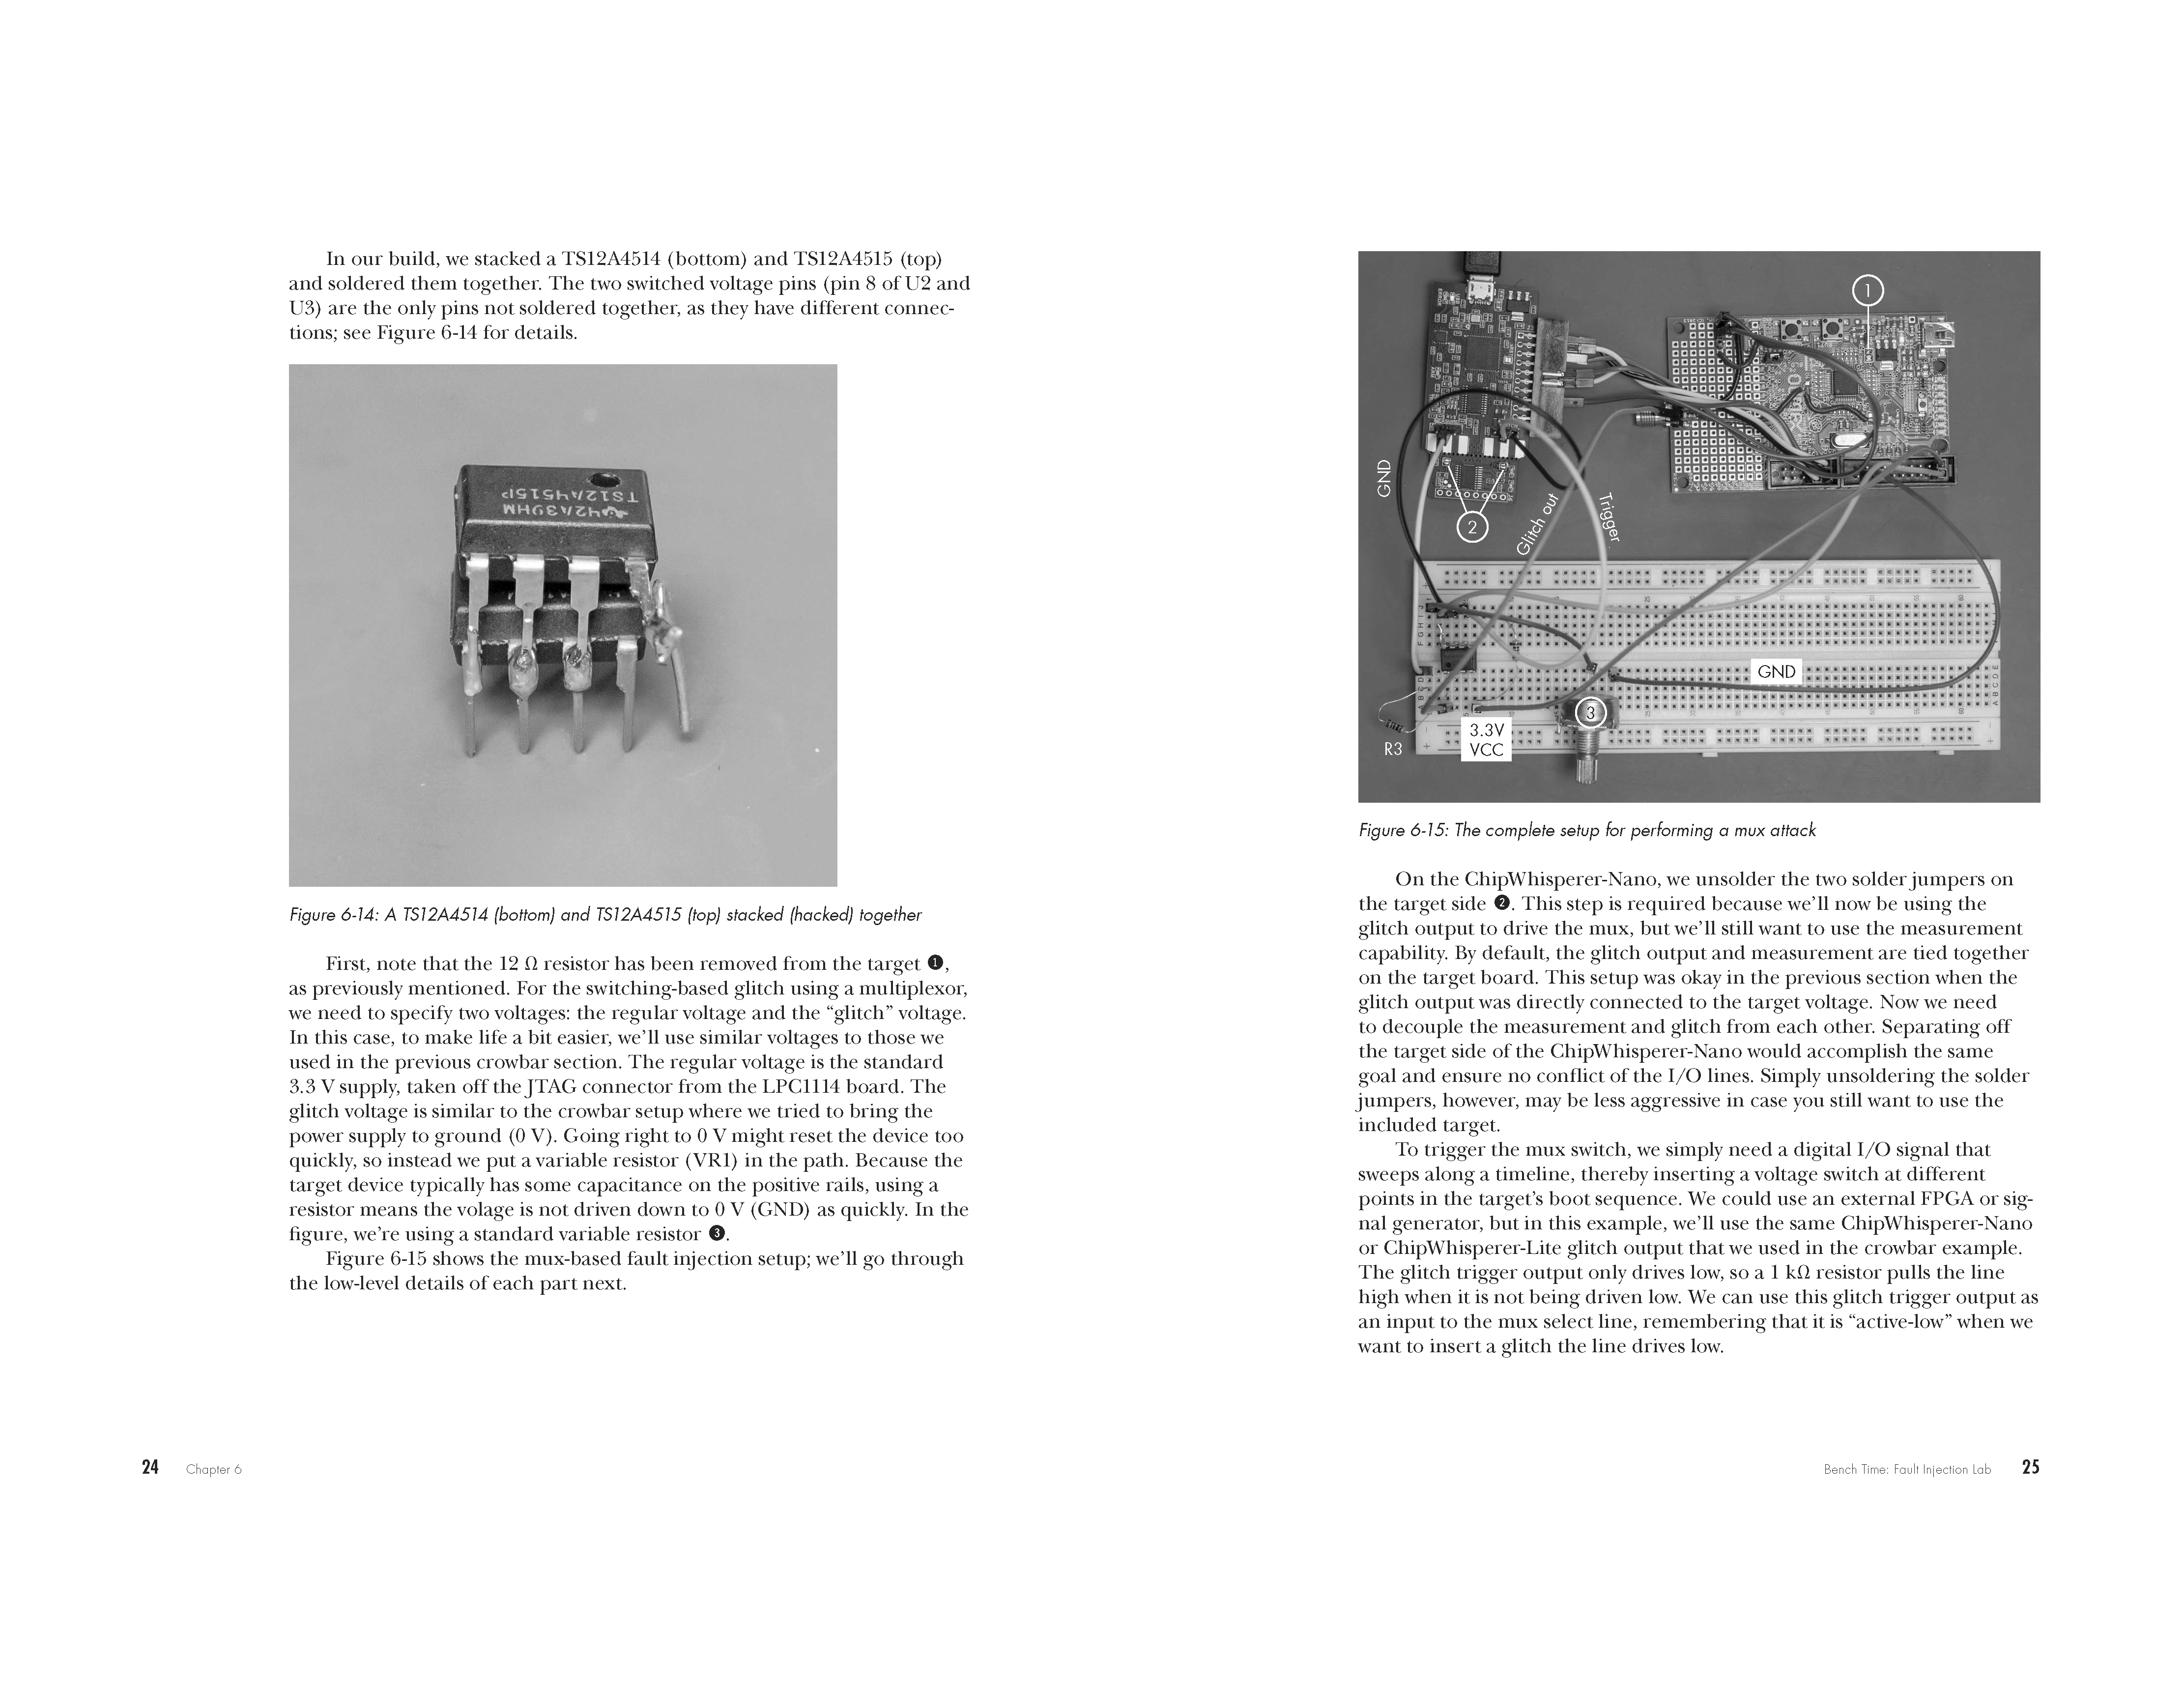 The Hardware Hacking Handbook pages 122 and 123